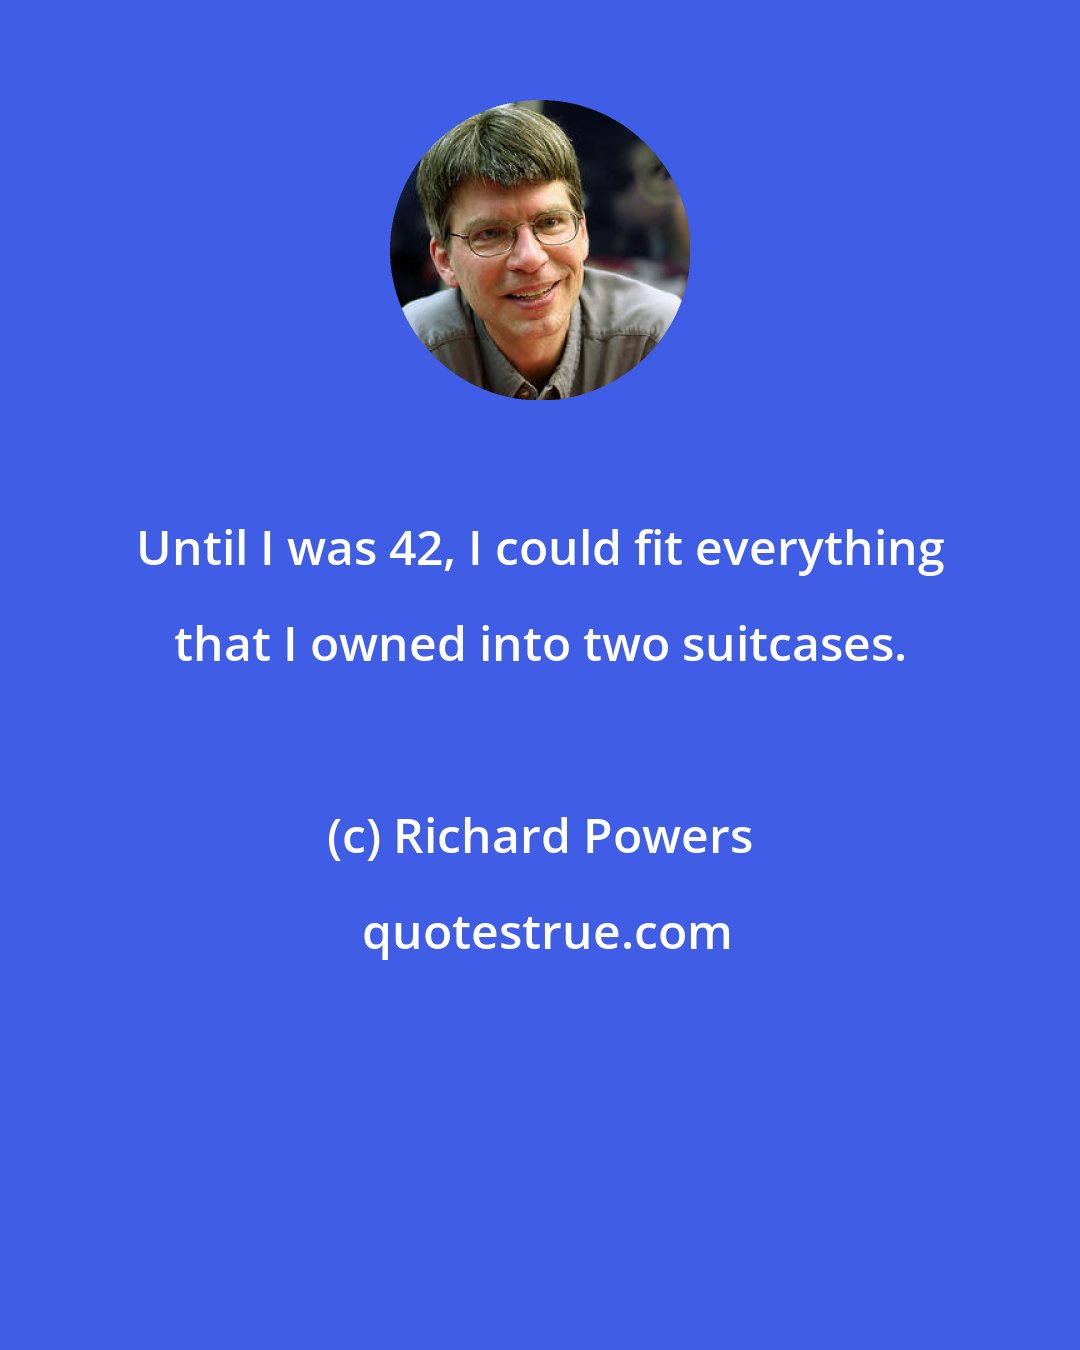 Richard Powers: Until I was 42, I could fit everything that I owned into two suitcases.